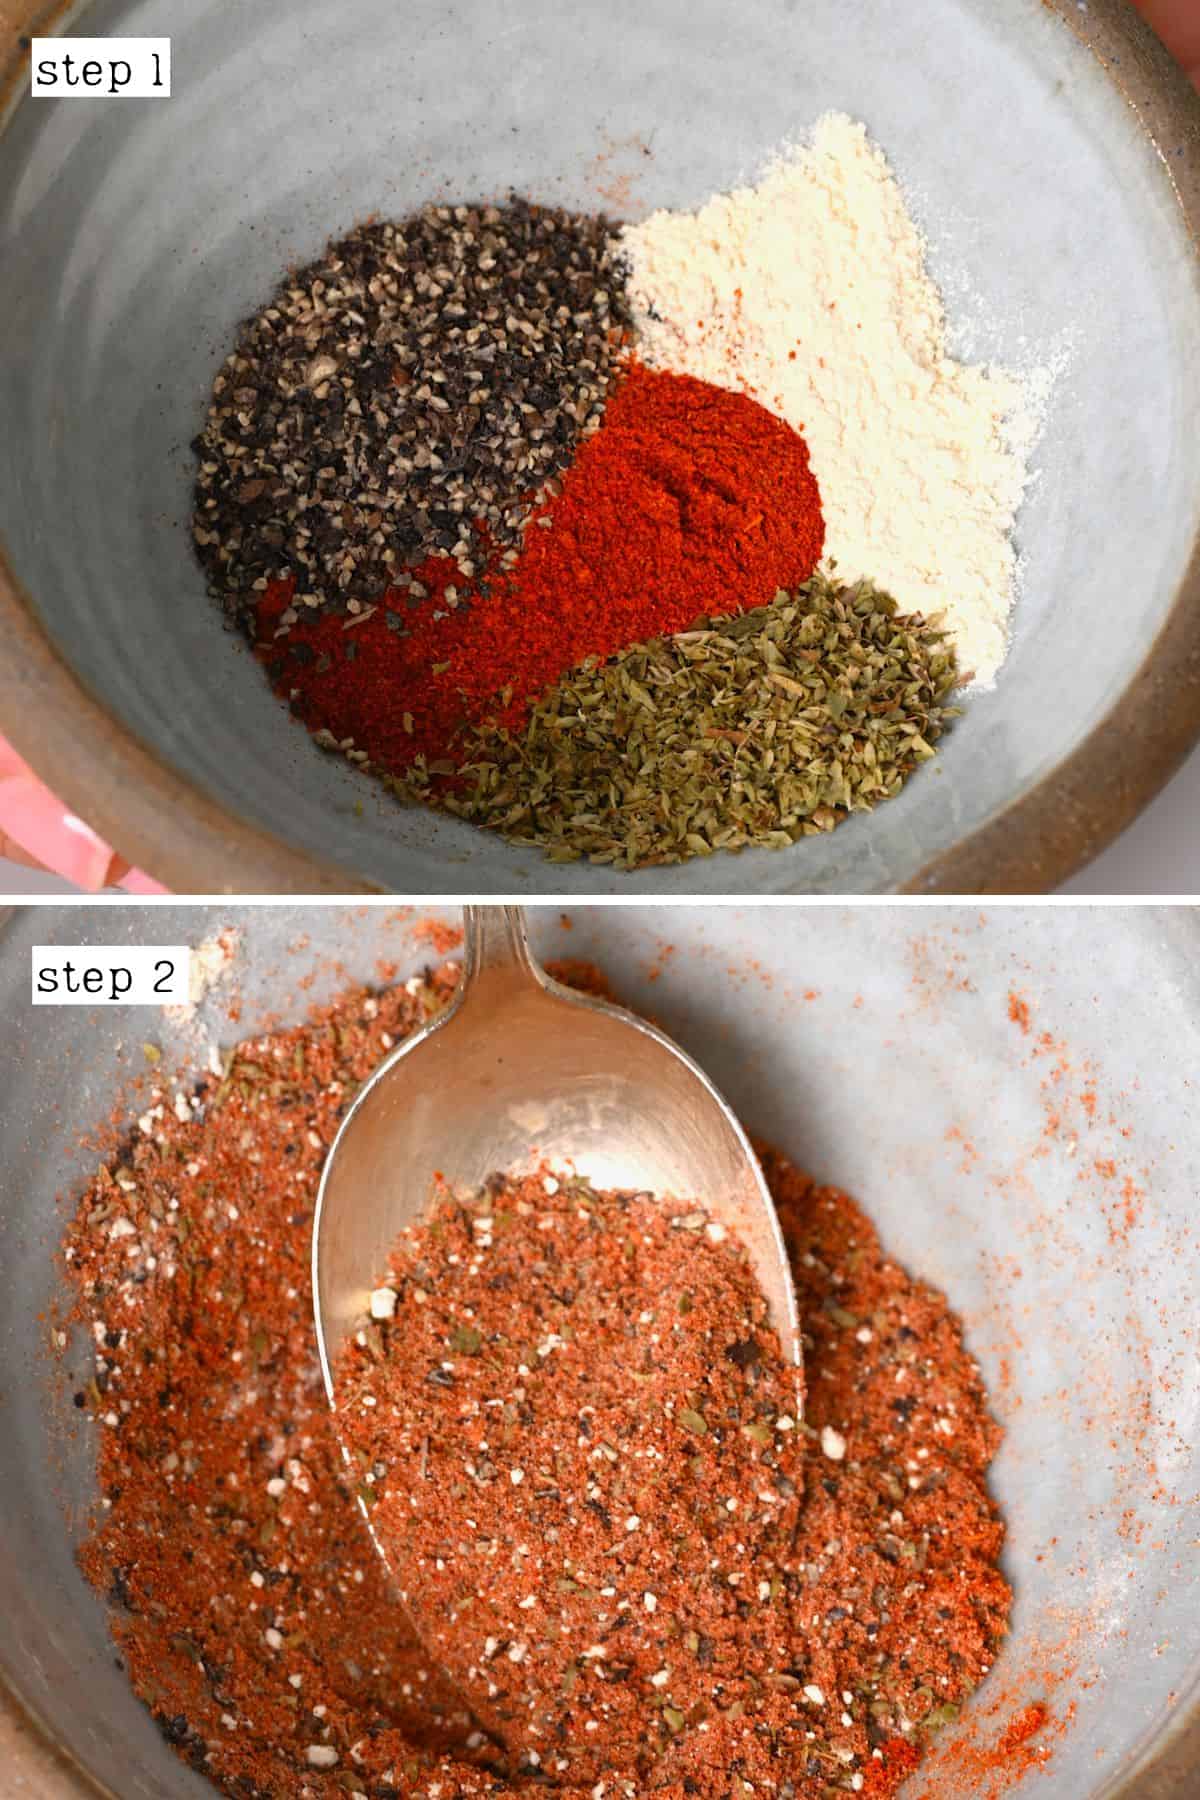 Mixing spices